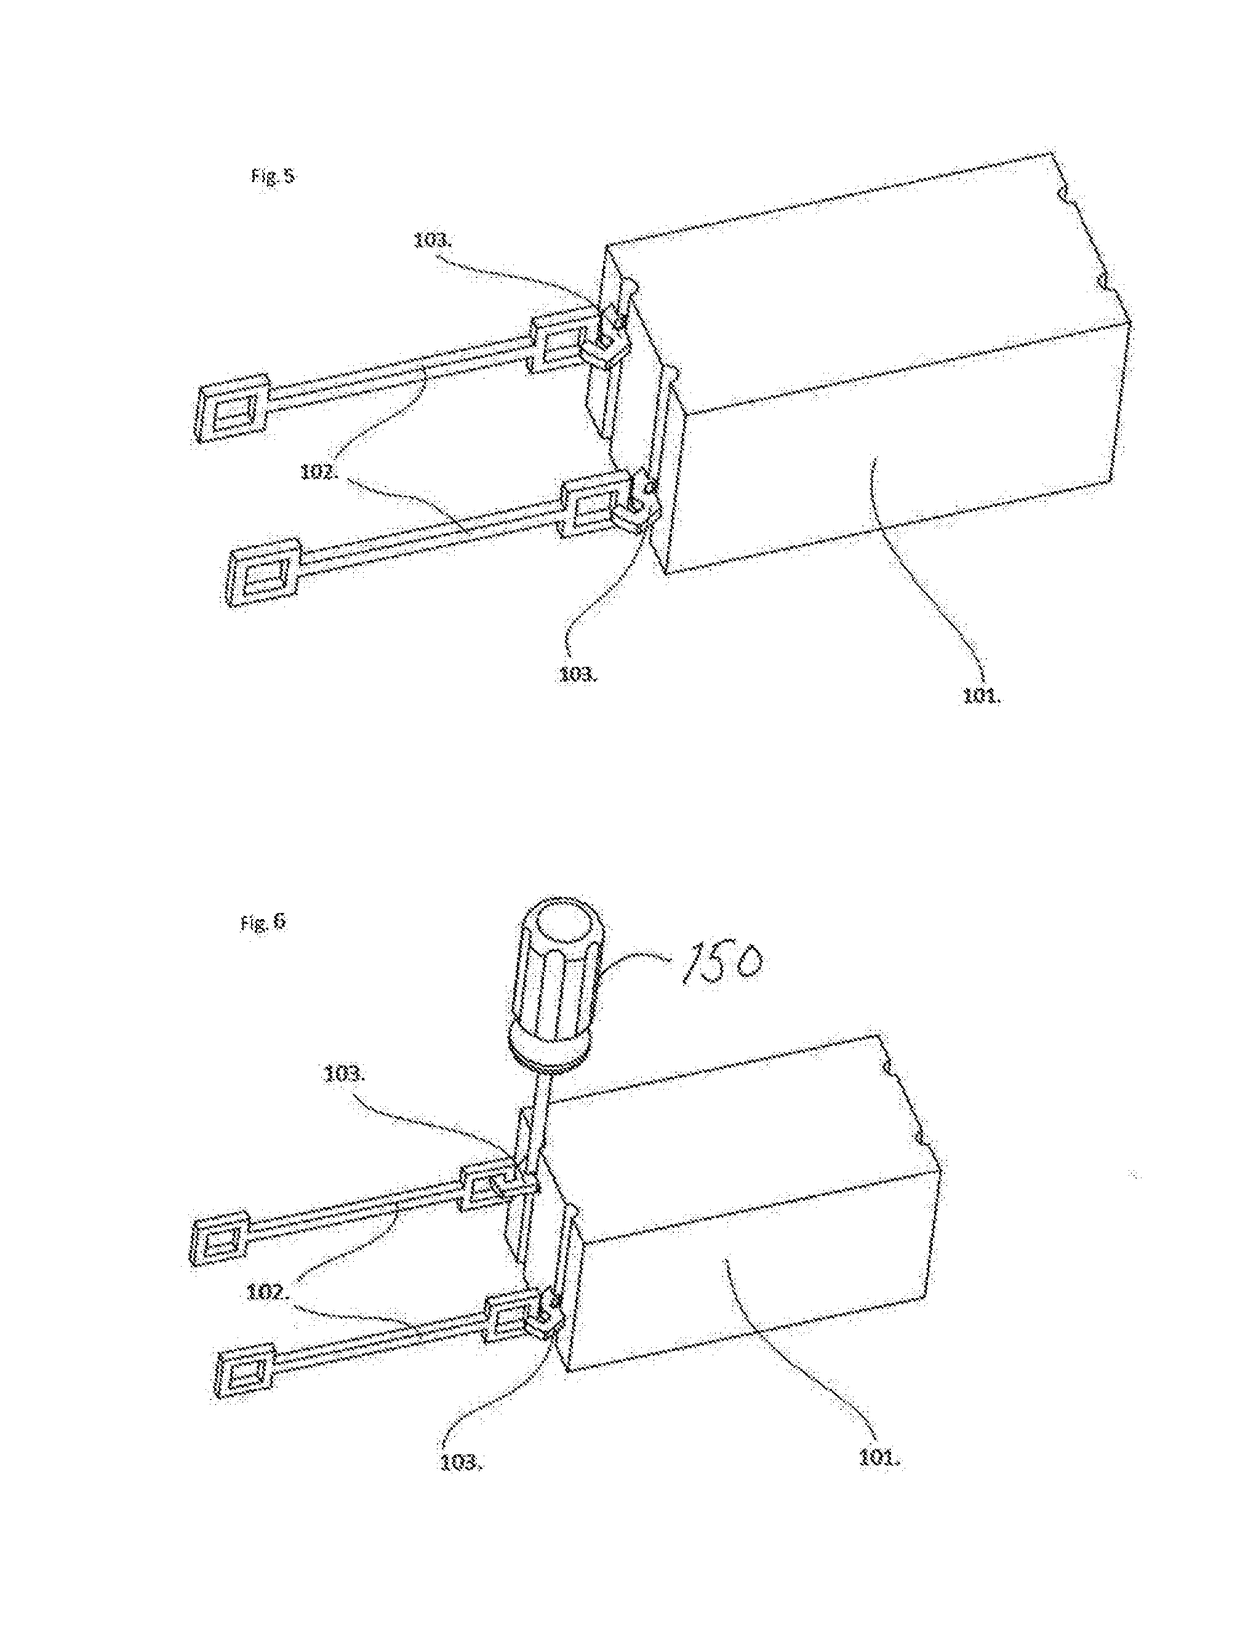 Modular furniture arrangement comprising electrically and mechanically connectable module furniture parts